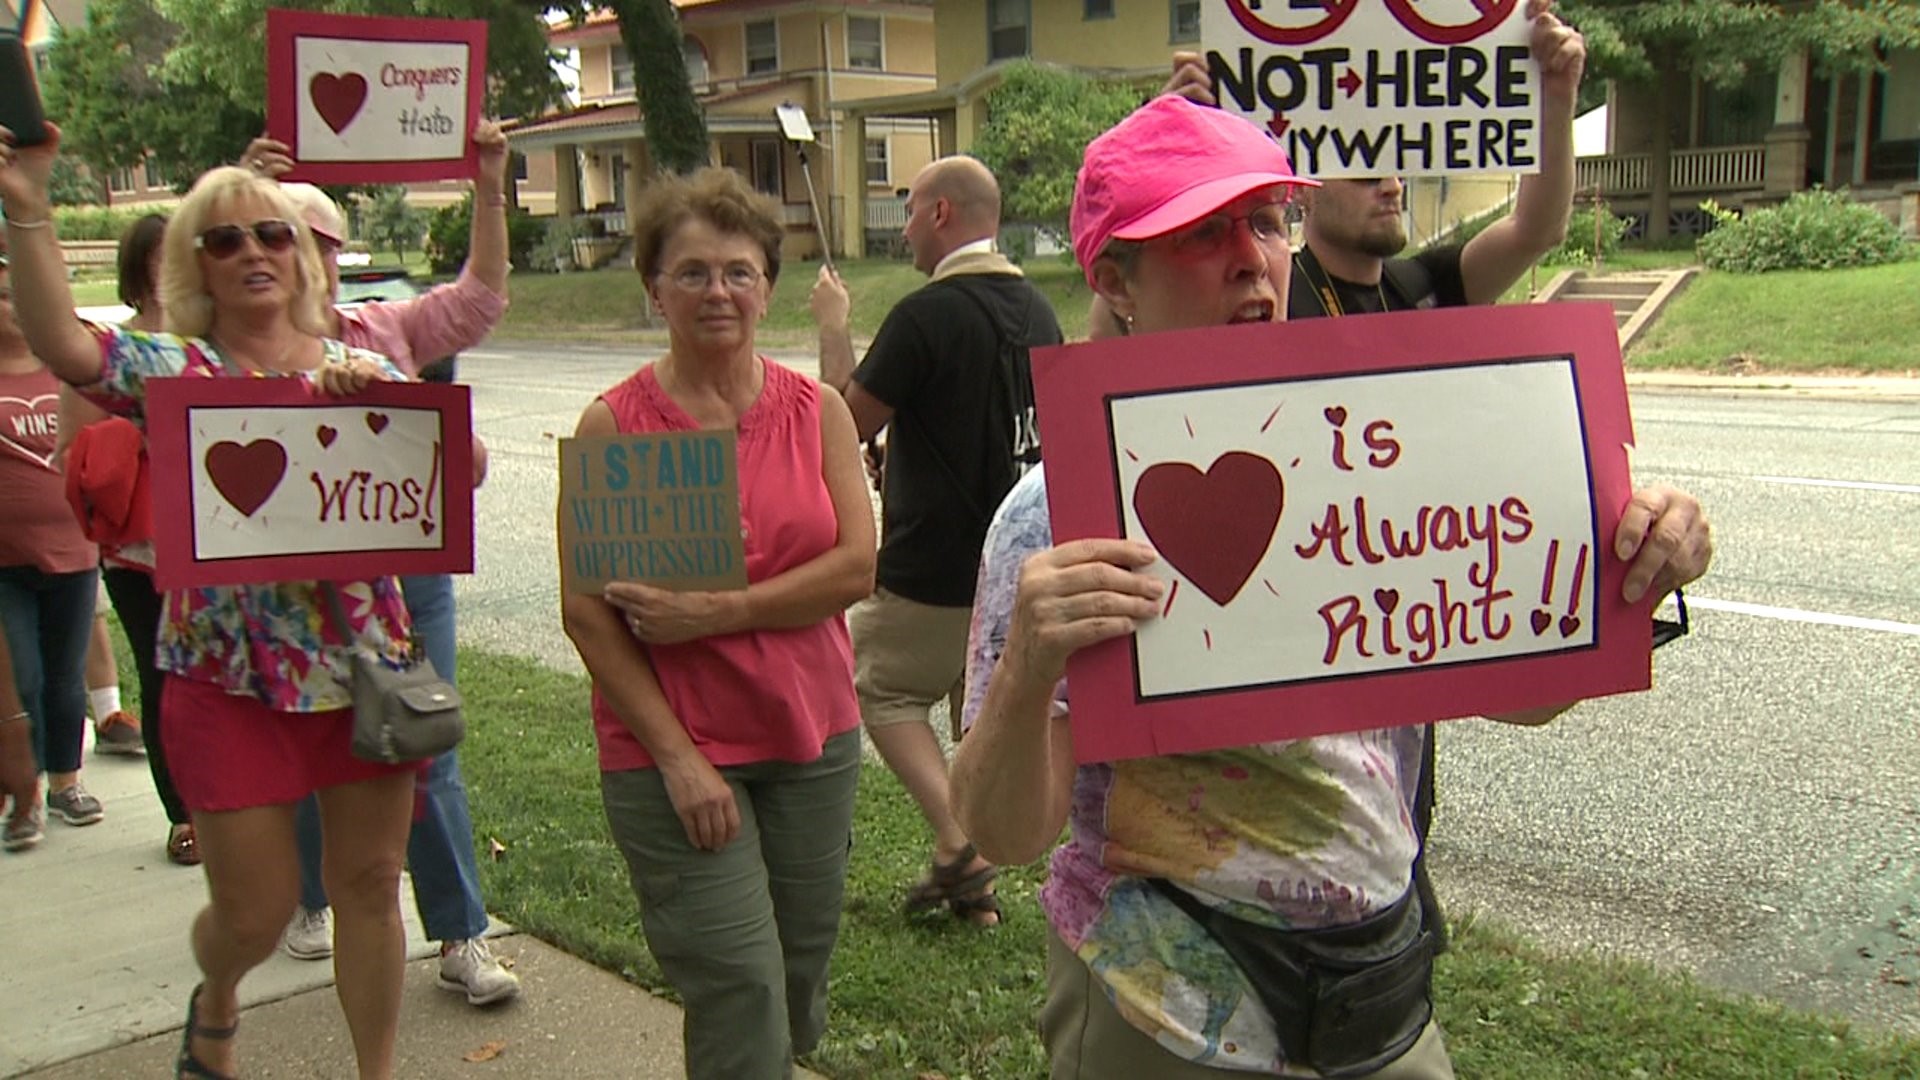 Rally against hate in Davenport